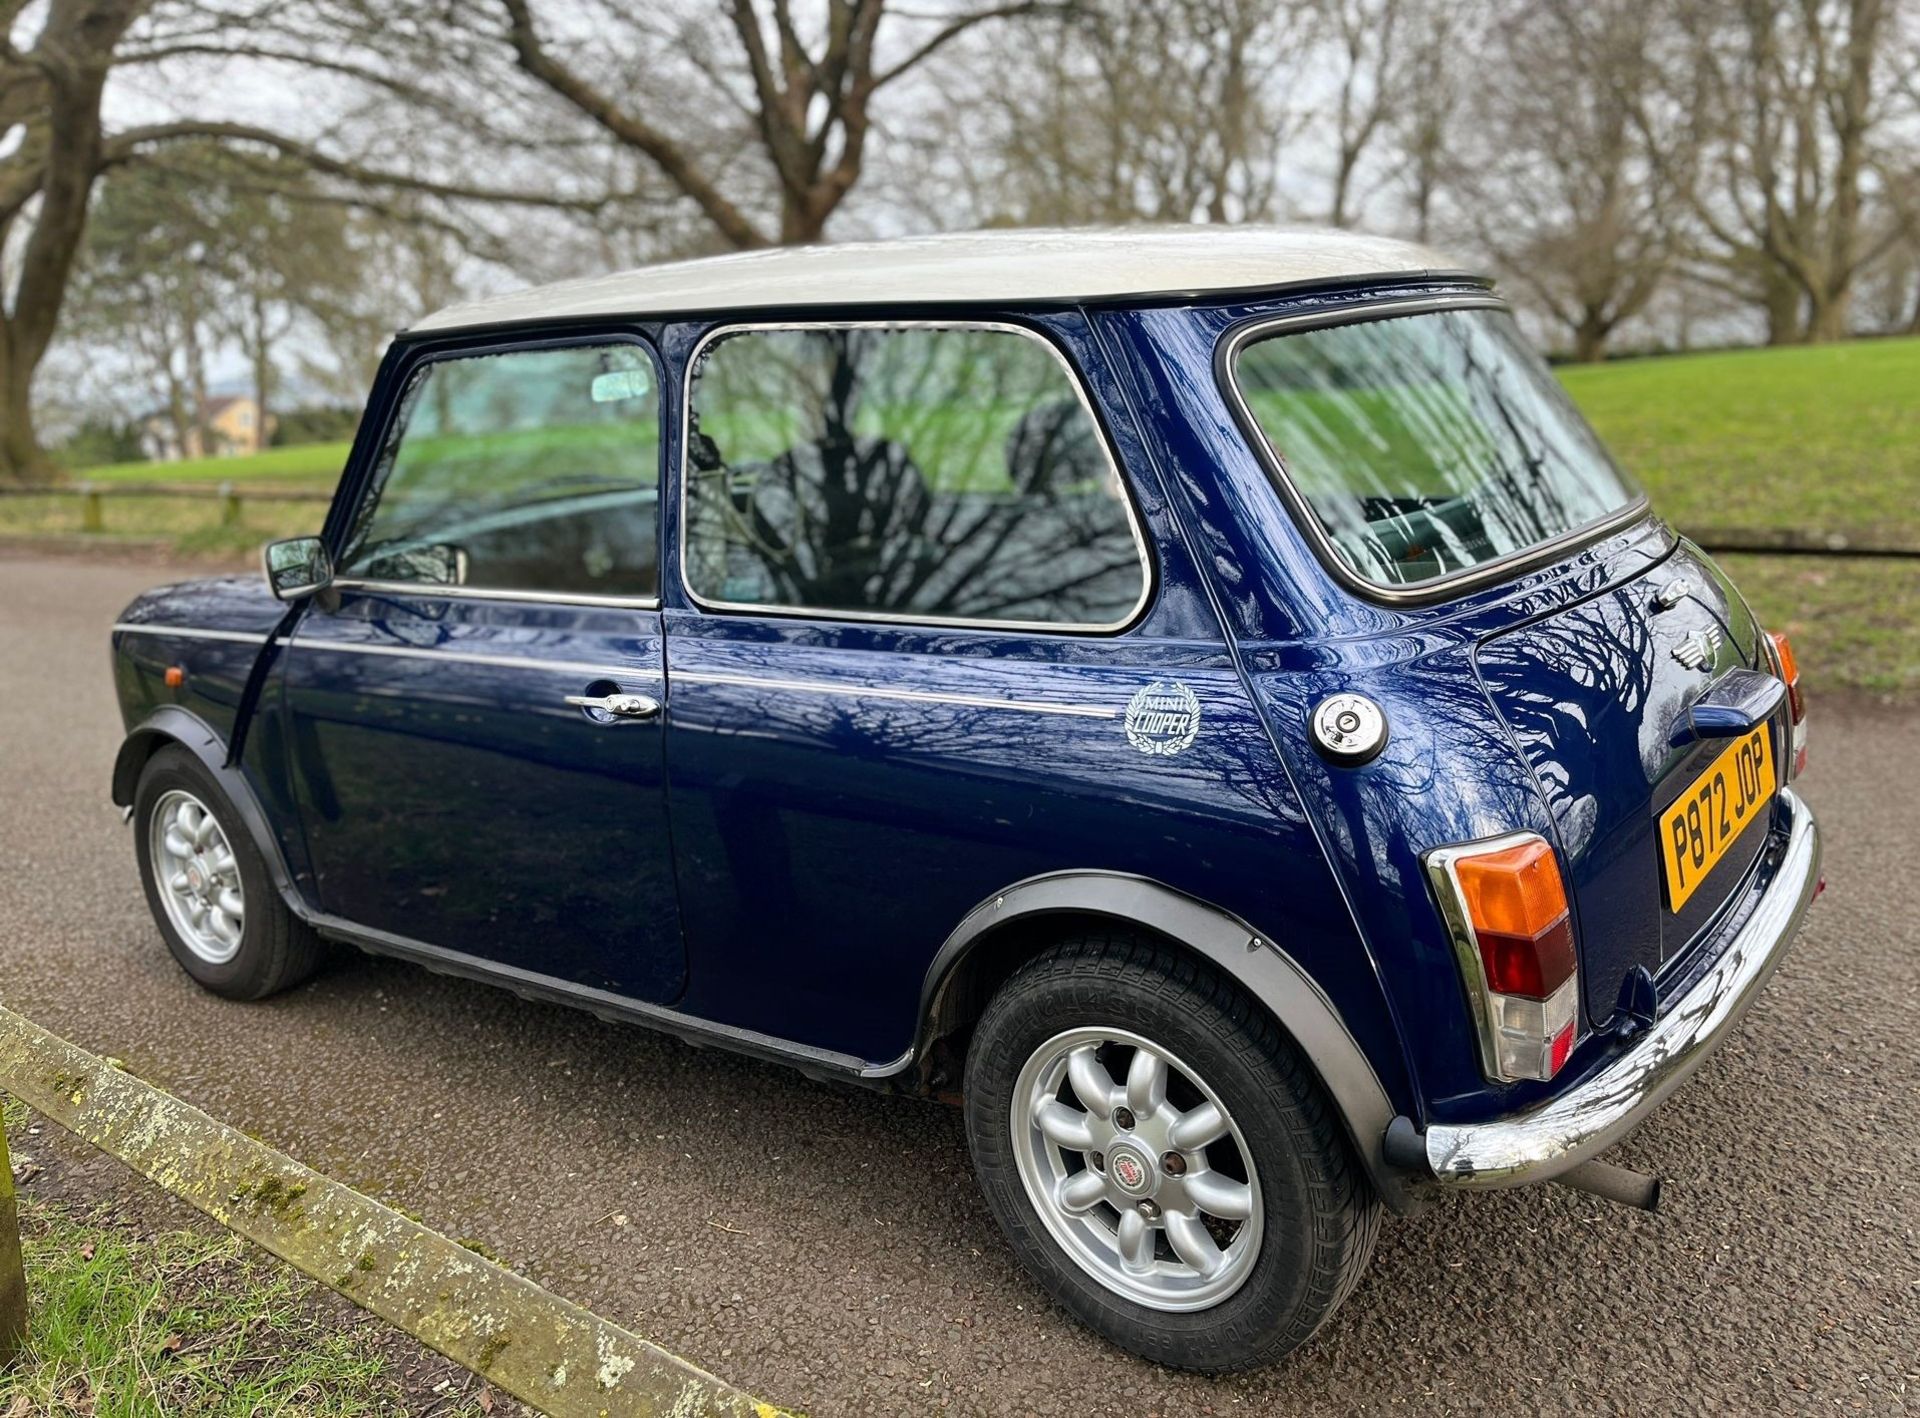 1997 MINI COOPER MPI Registration Number: P872 JOP Chassis Number: SAXXNNAZEBD141820 Recorded - Image 4 of 13